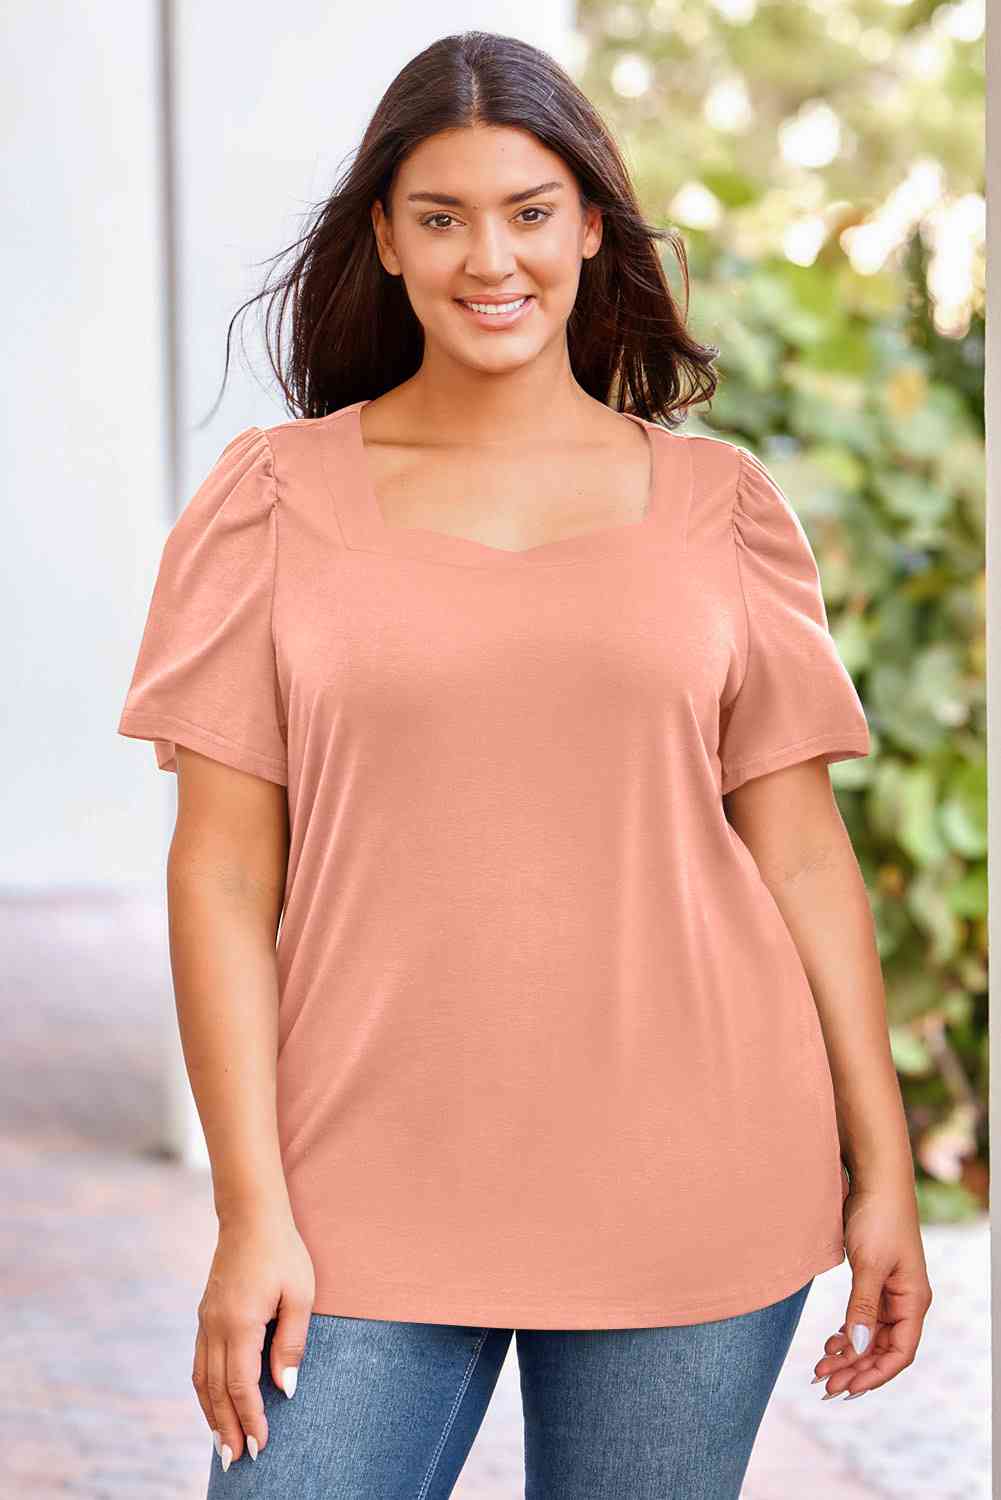 Plus Size Square Neck Puff Sleeve Top (7 Colors) Shirts & Tops Krazy Heart Designs Boutique Peach 1X 